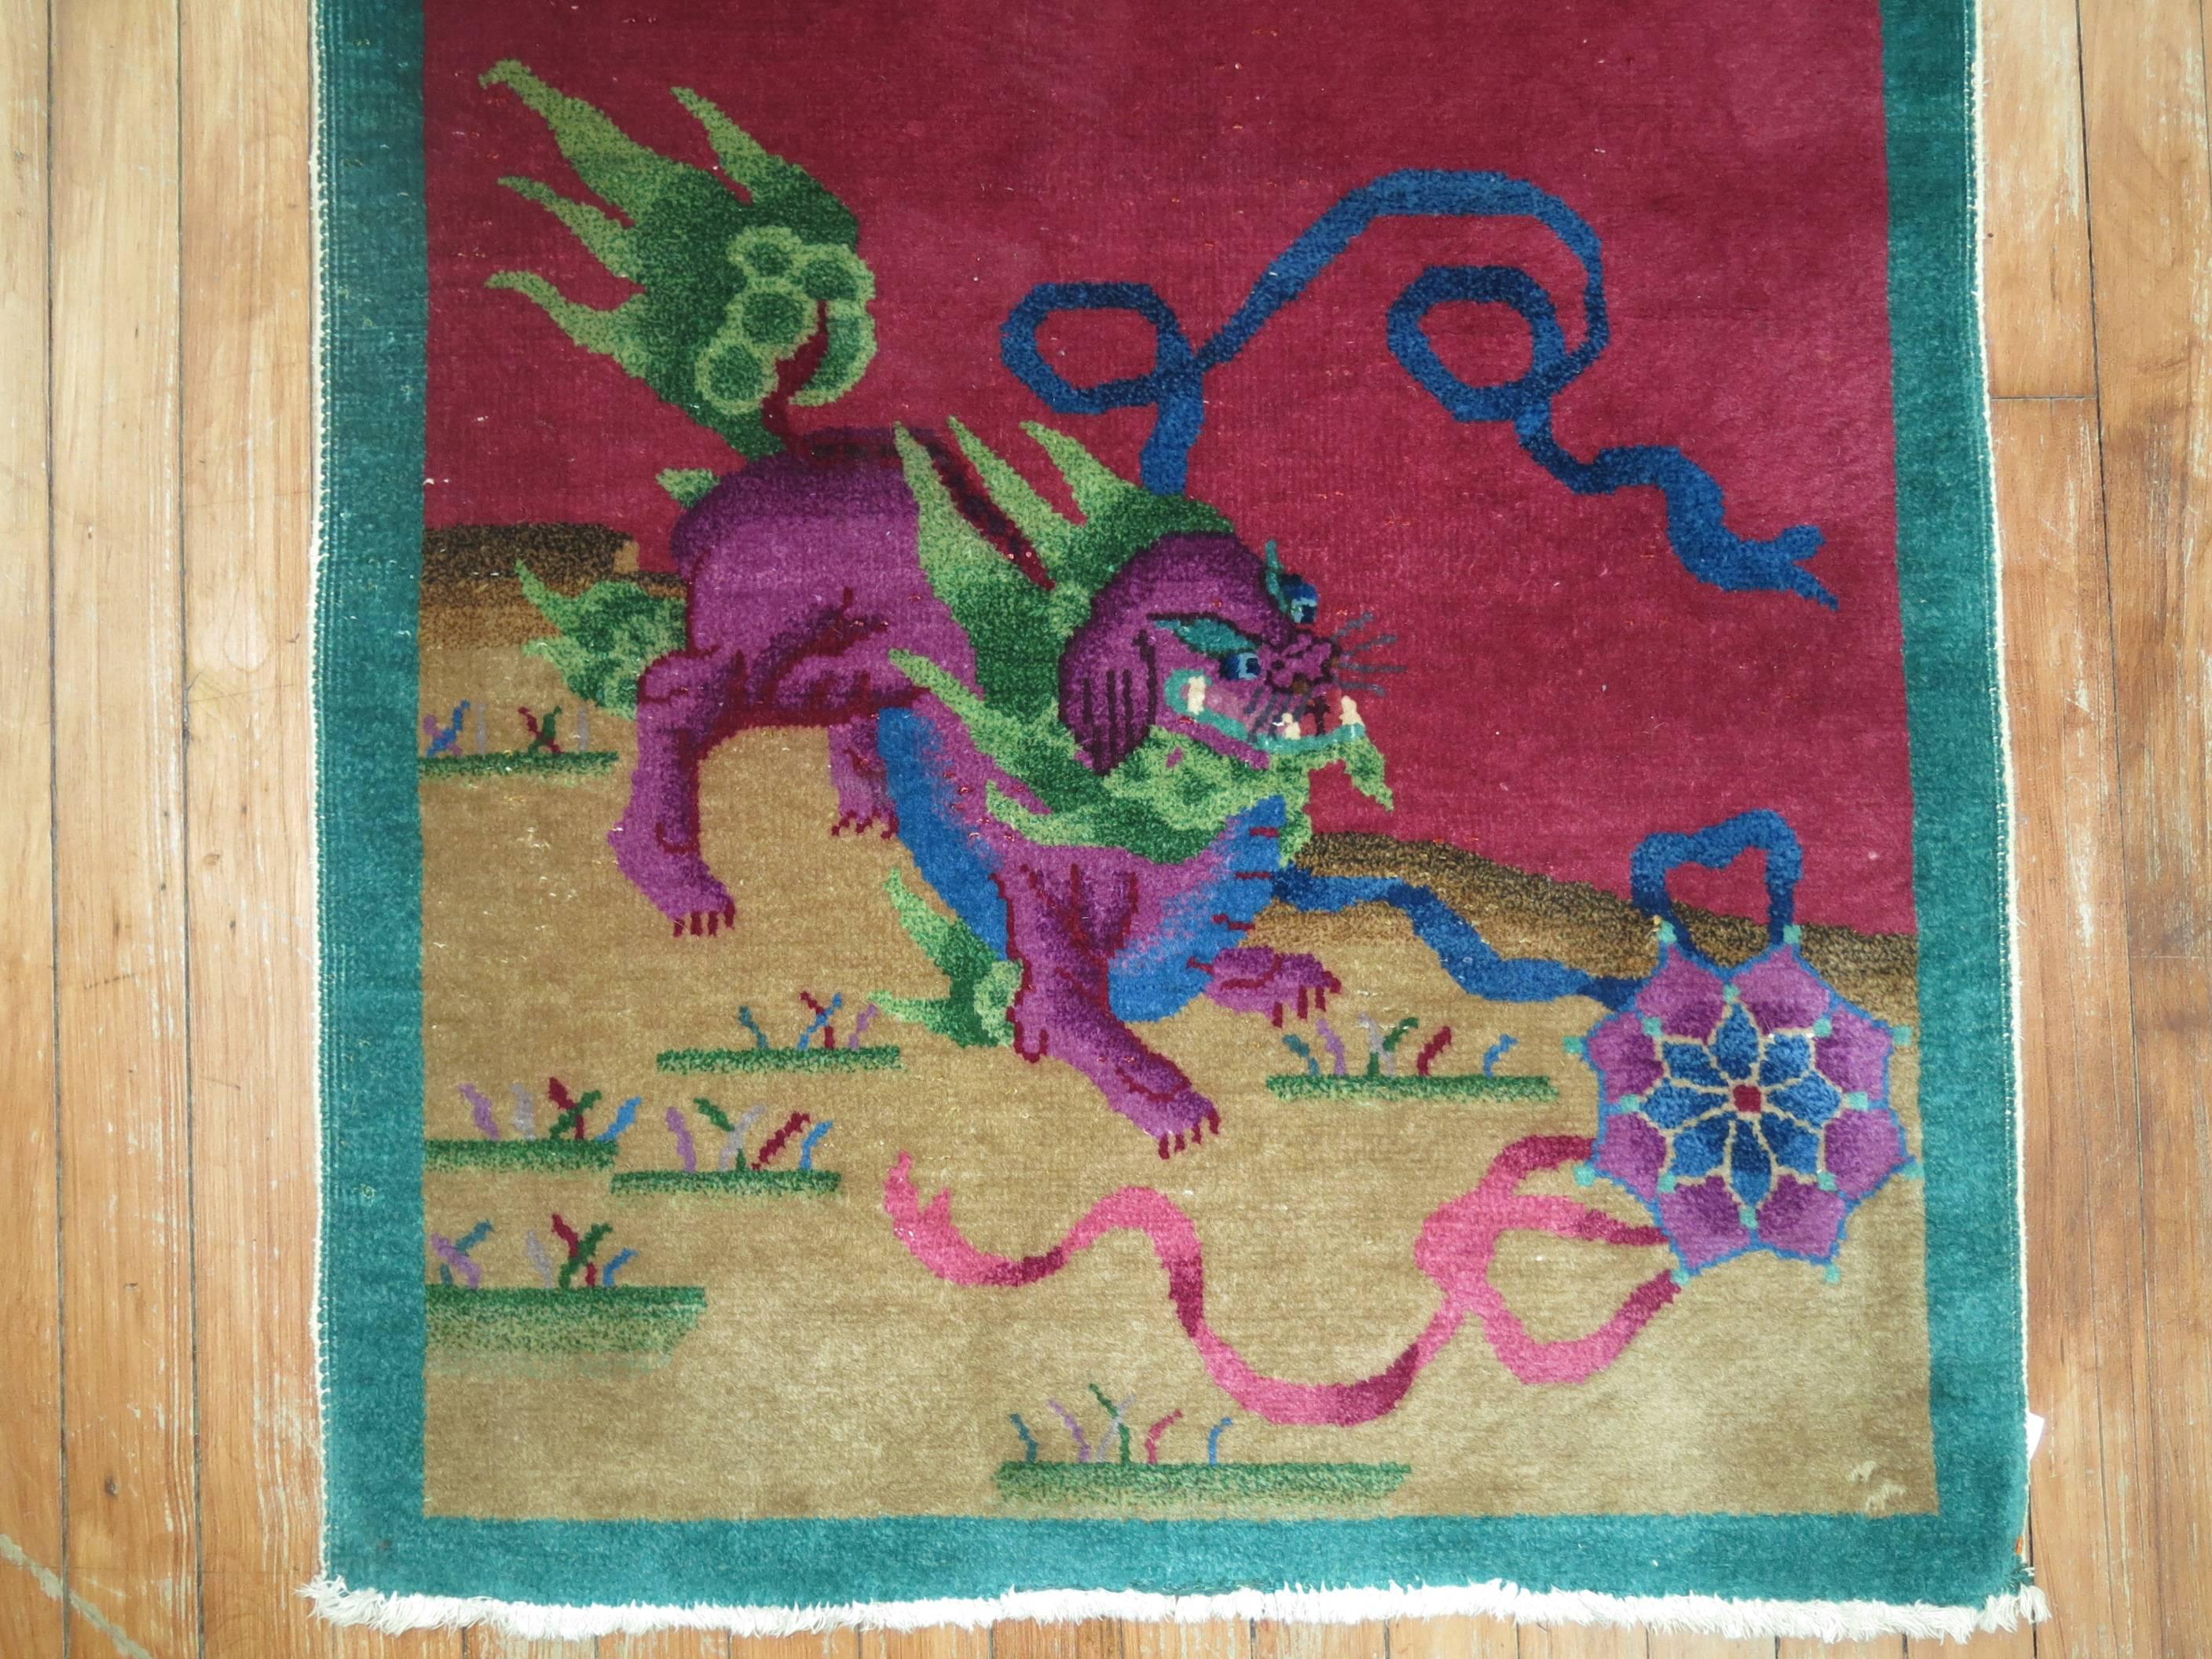 Chinese Art Deco rug featuring a dragon foo dog.